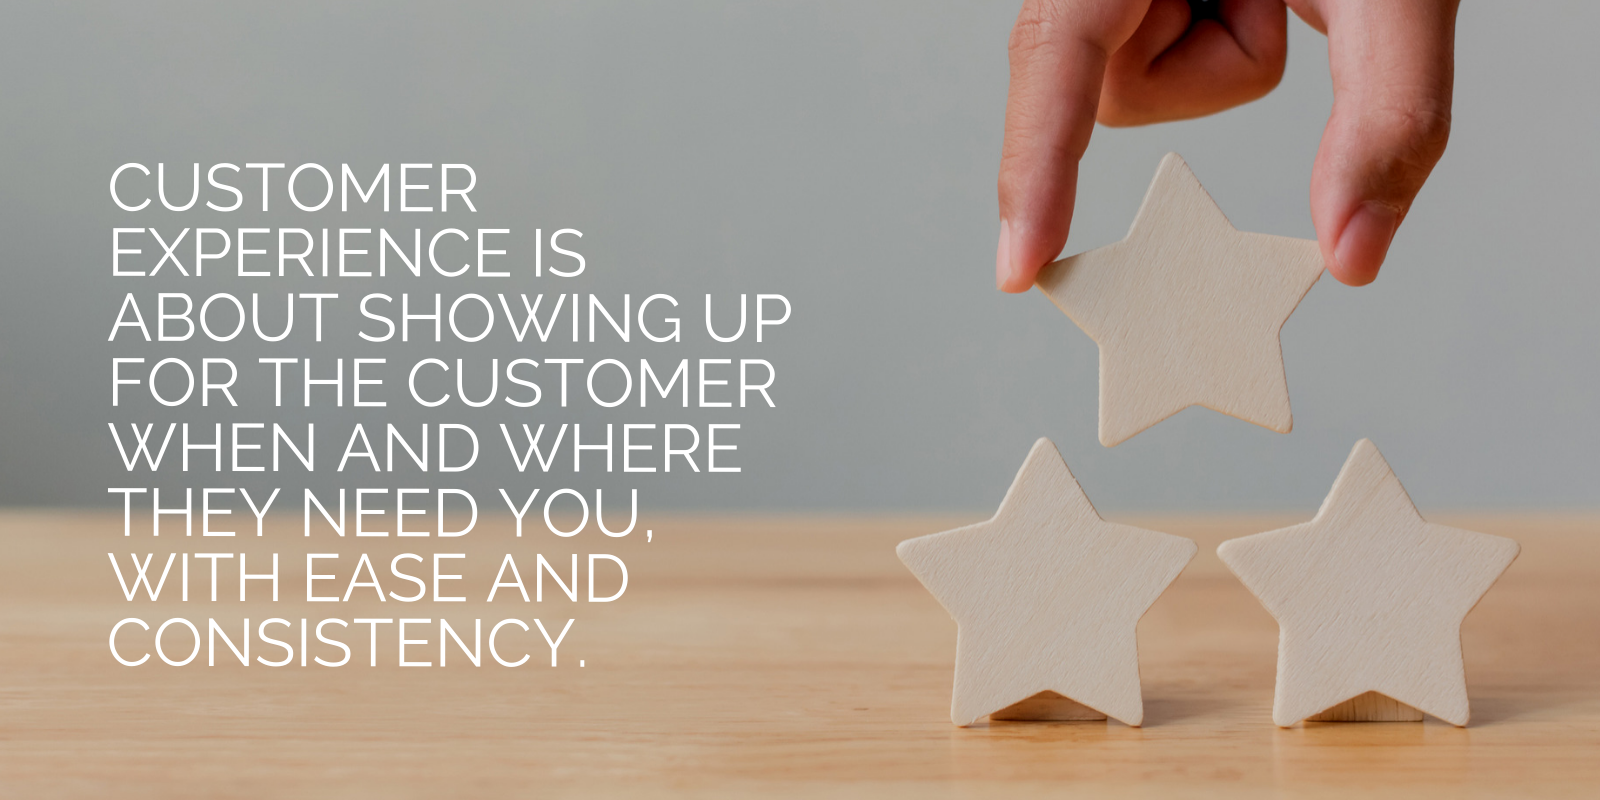 Customer experience showing up